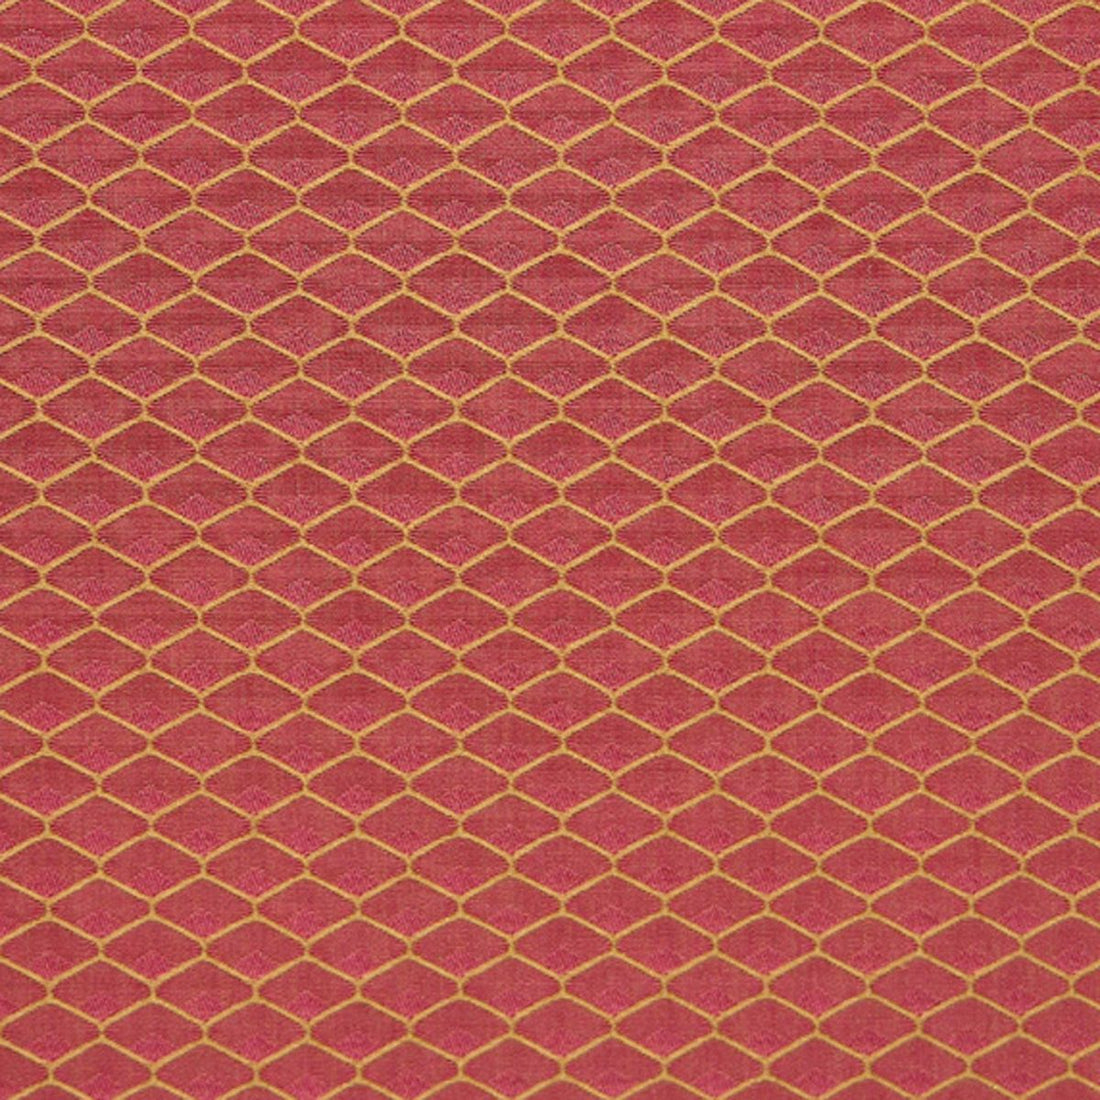 Damask Grillage fabric in red color - pattern number M0 00011375 - by Scalamandre in the Old World Weavers collection